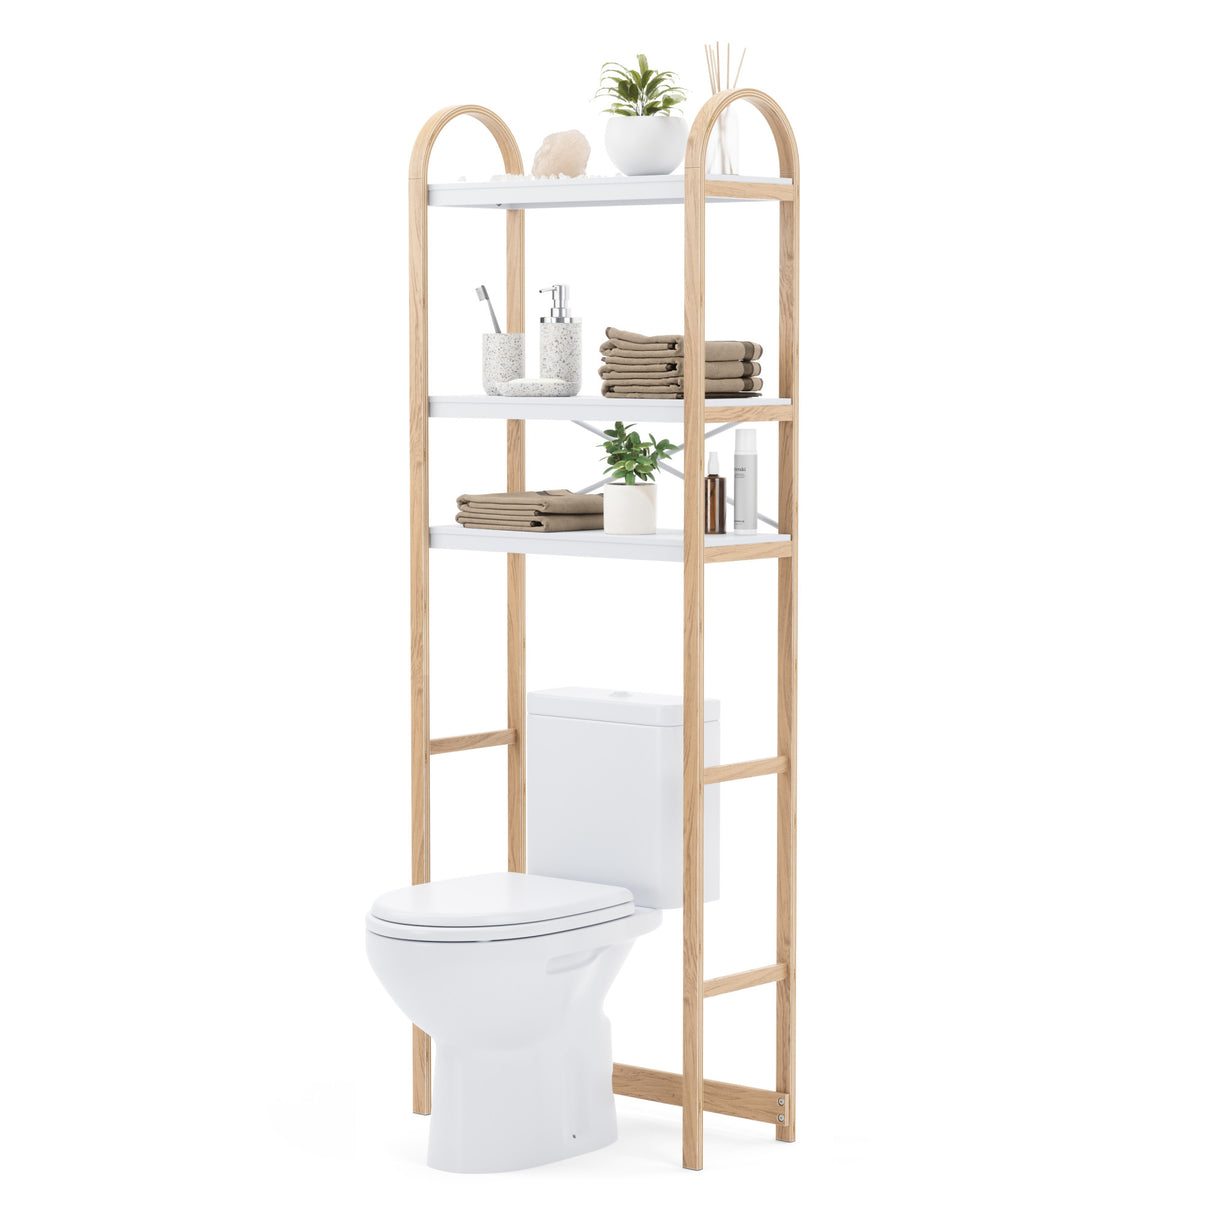 Over the Toilet Storage - Leaning Bathroom Ladder